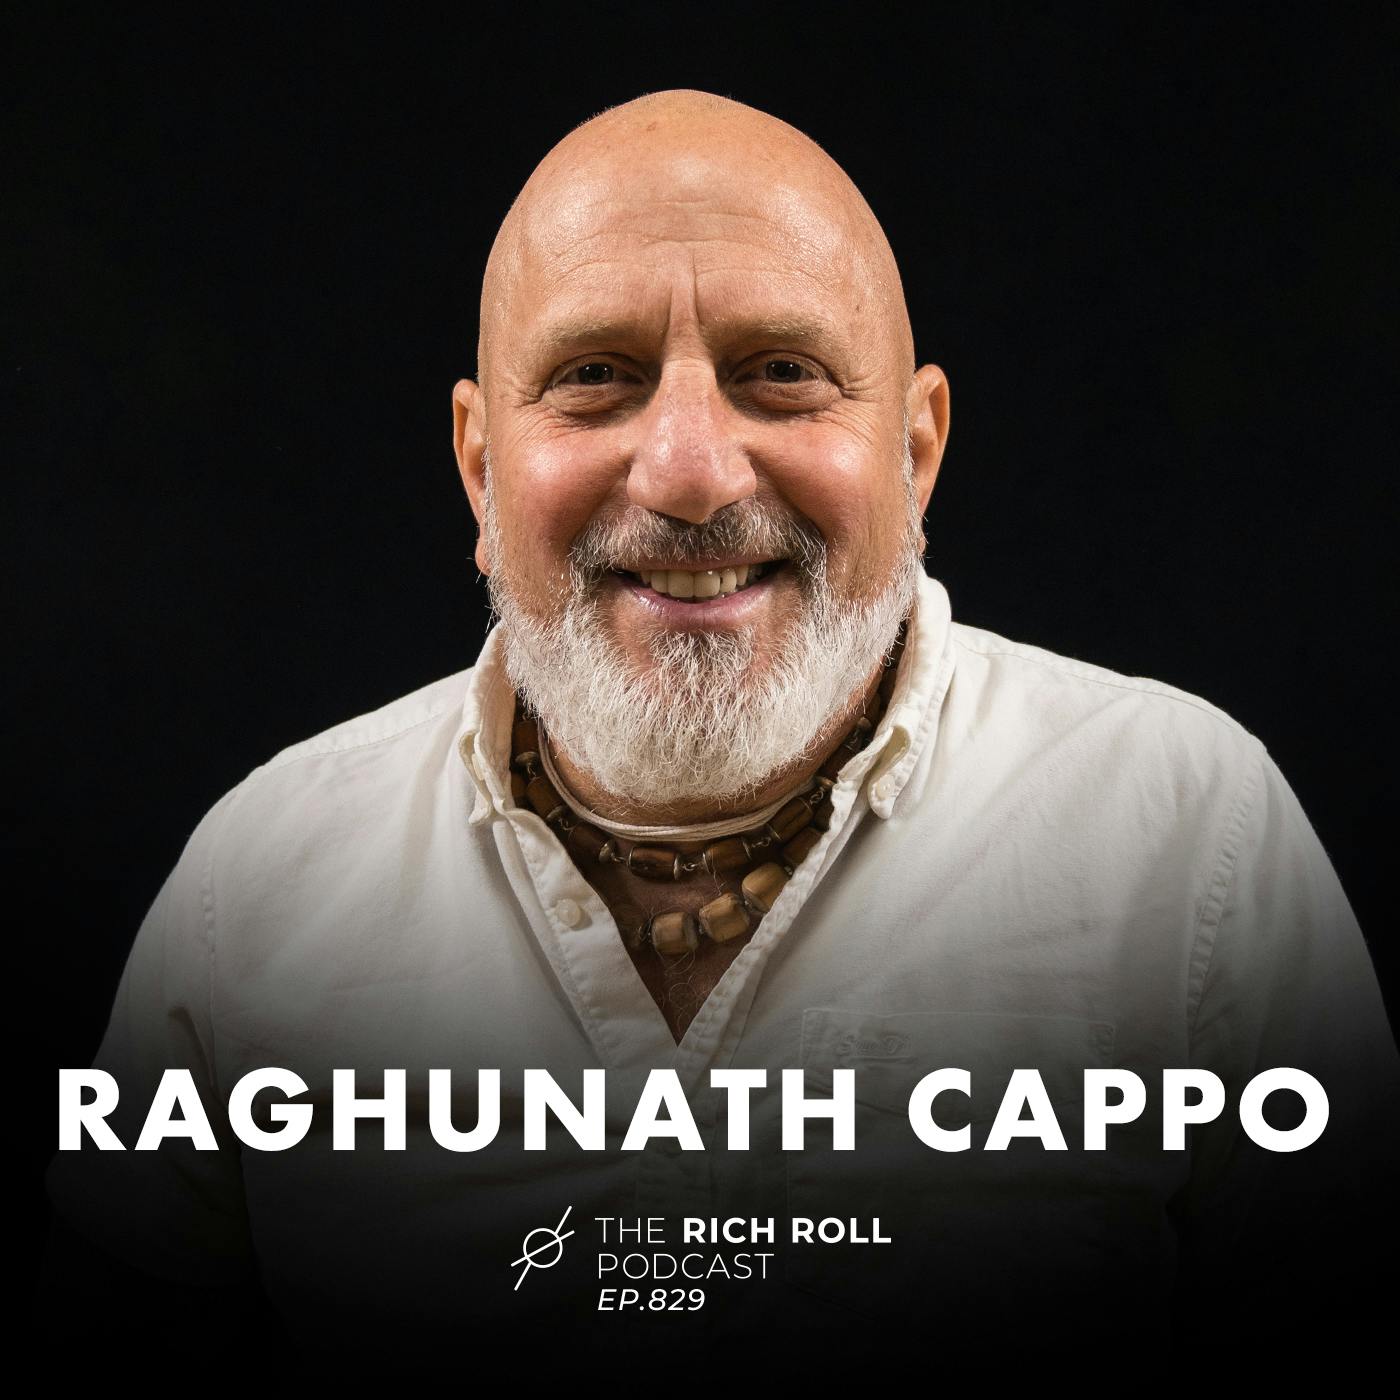 From Punk to Monk: Raghunath Cappo on The Wisdom of The Sages, Bhakti Yoga & The Pursuit of a Spiritual Life